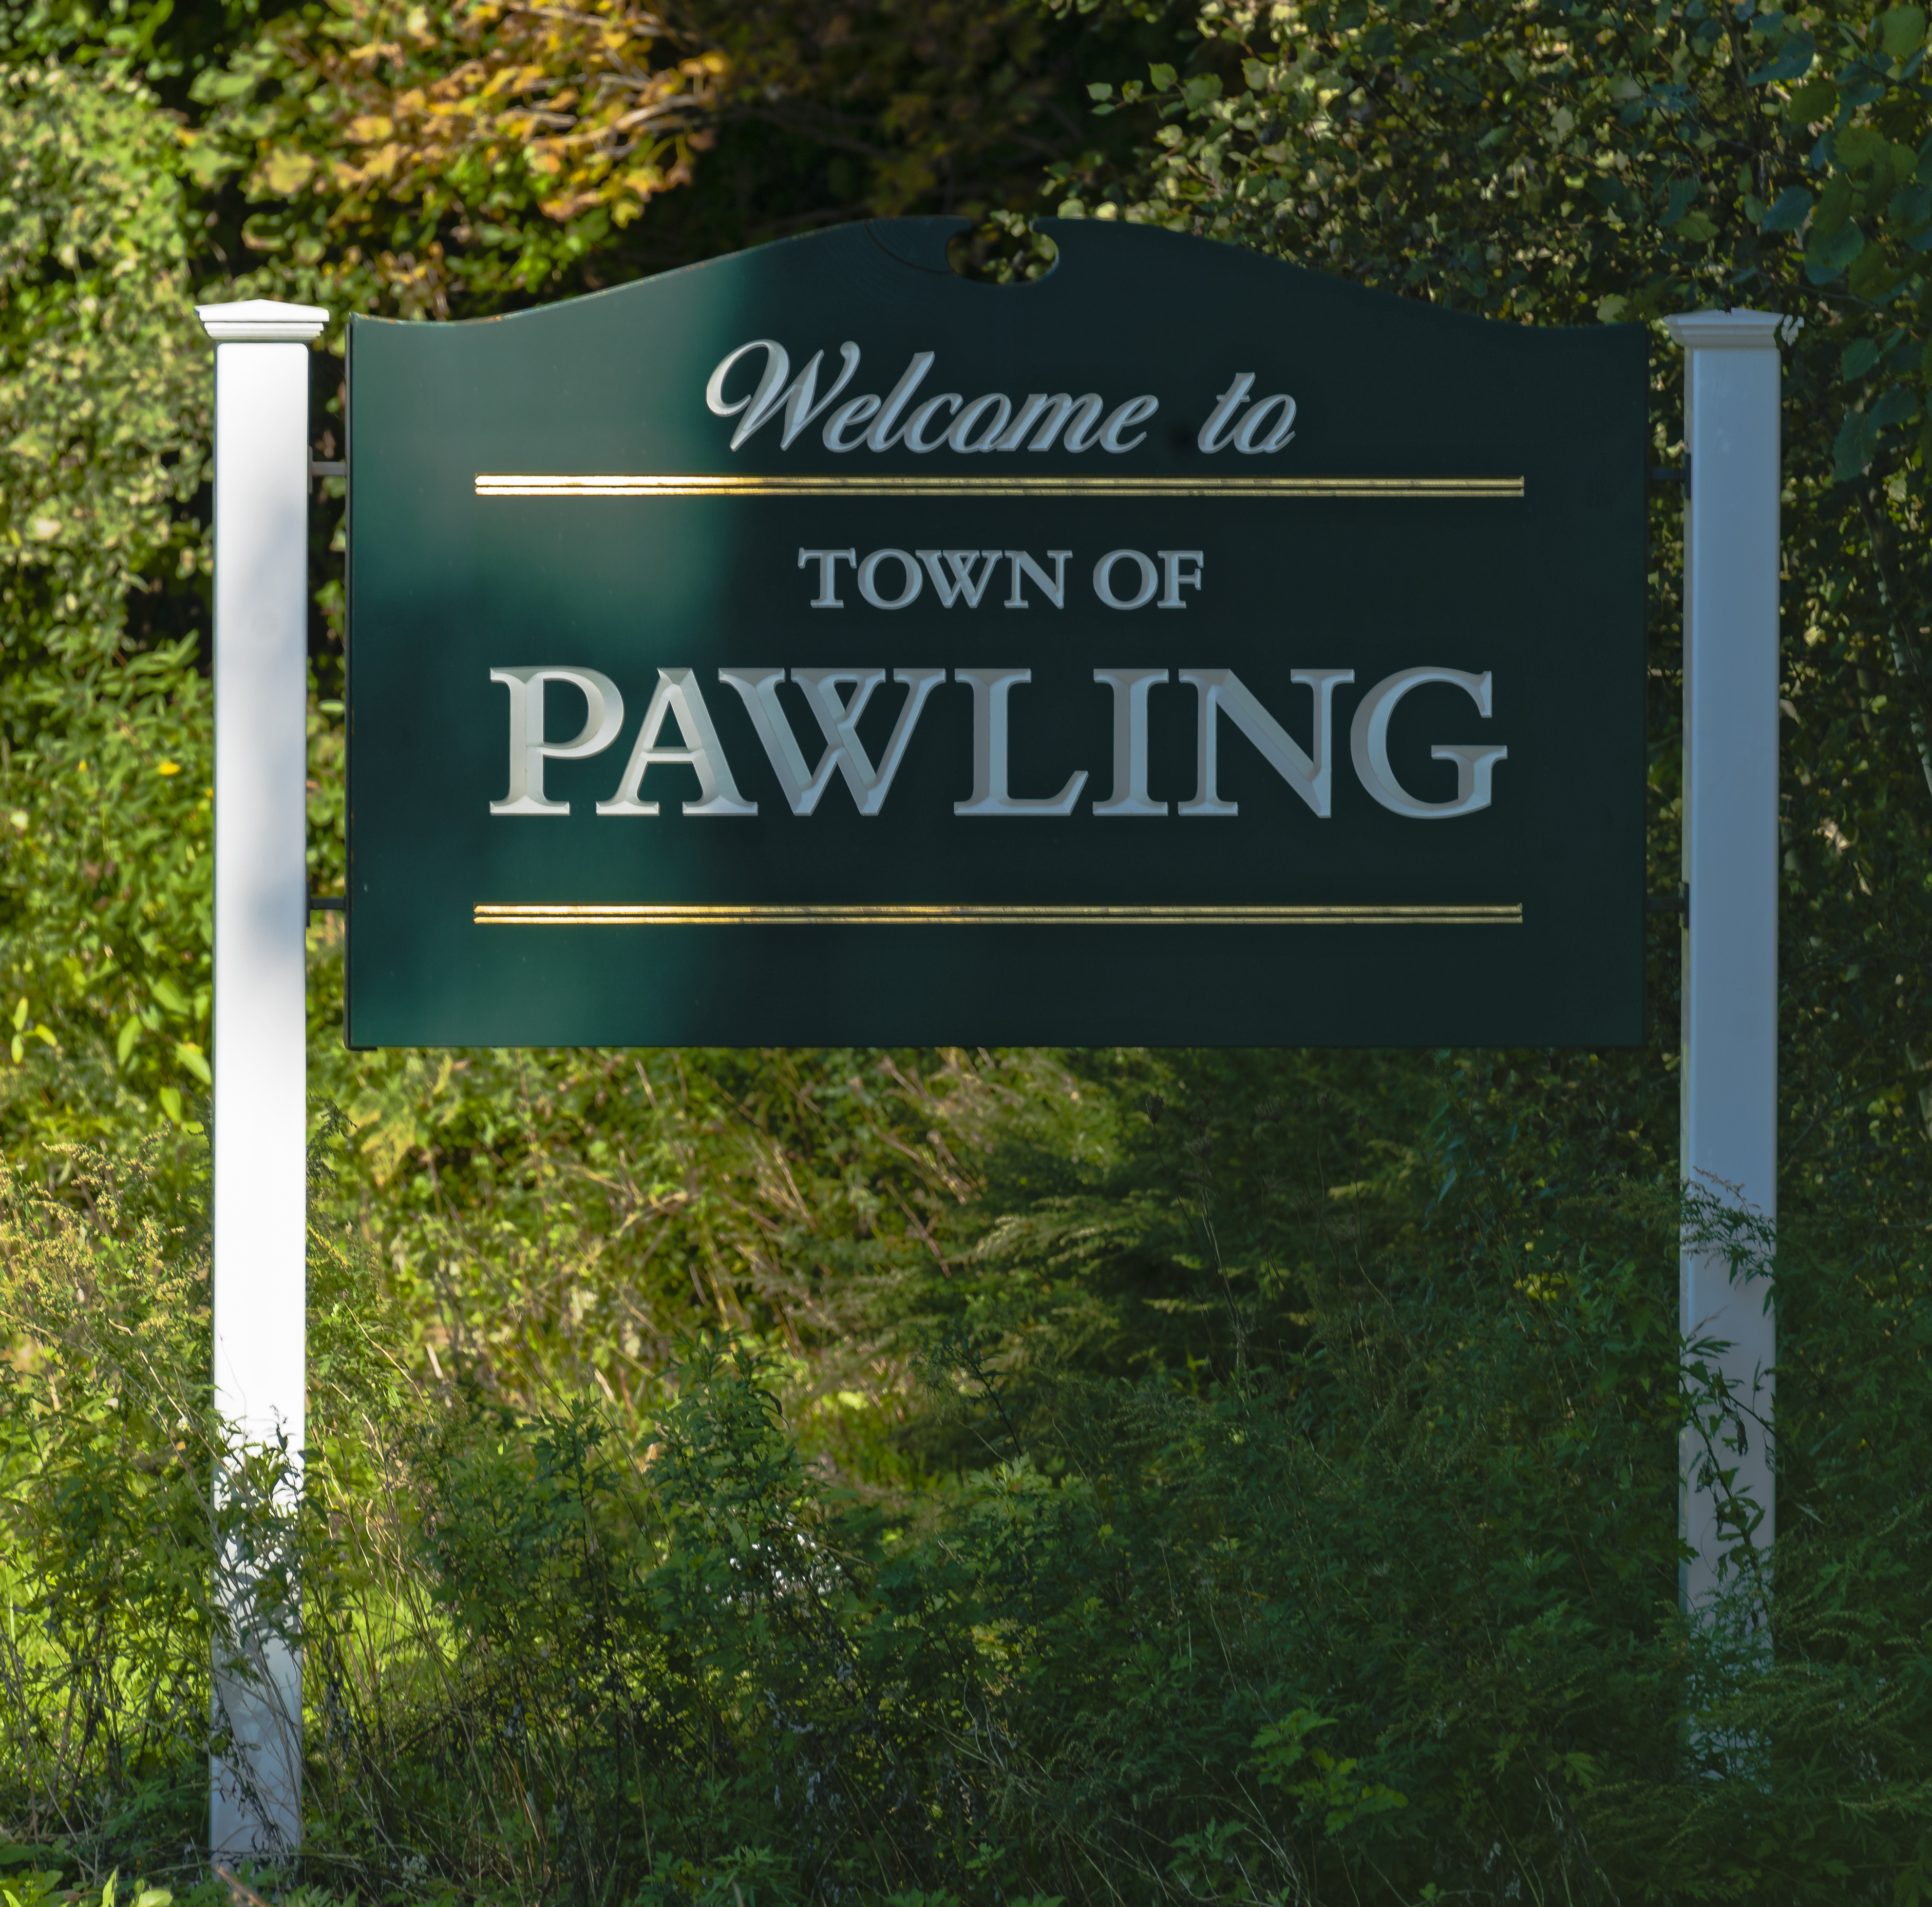 Pawling, NY, welcome sign.jpg